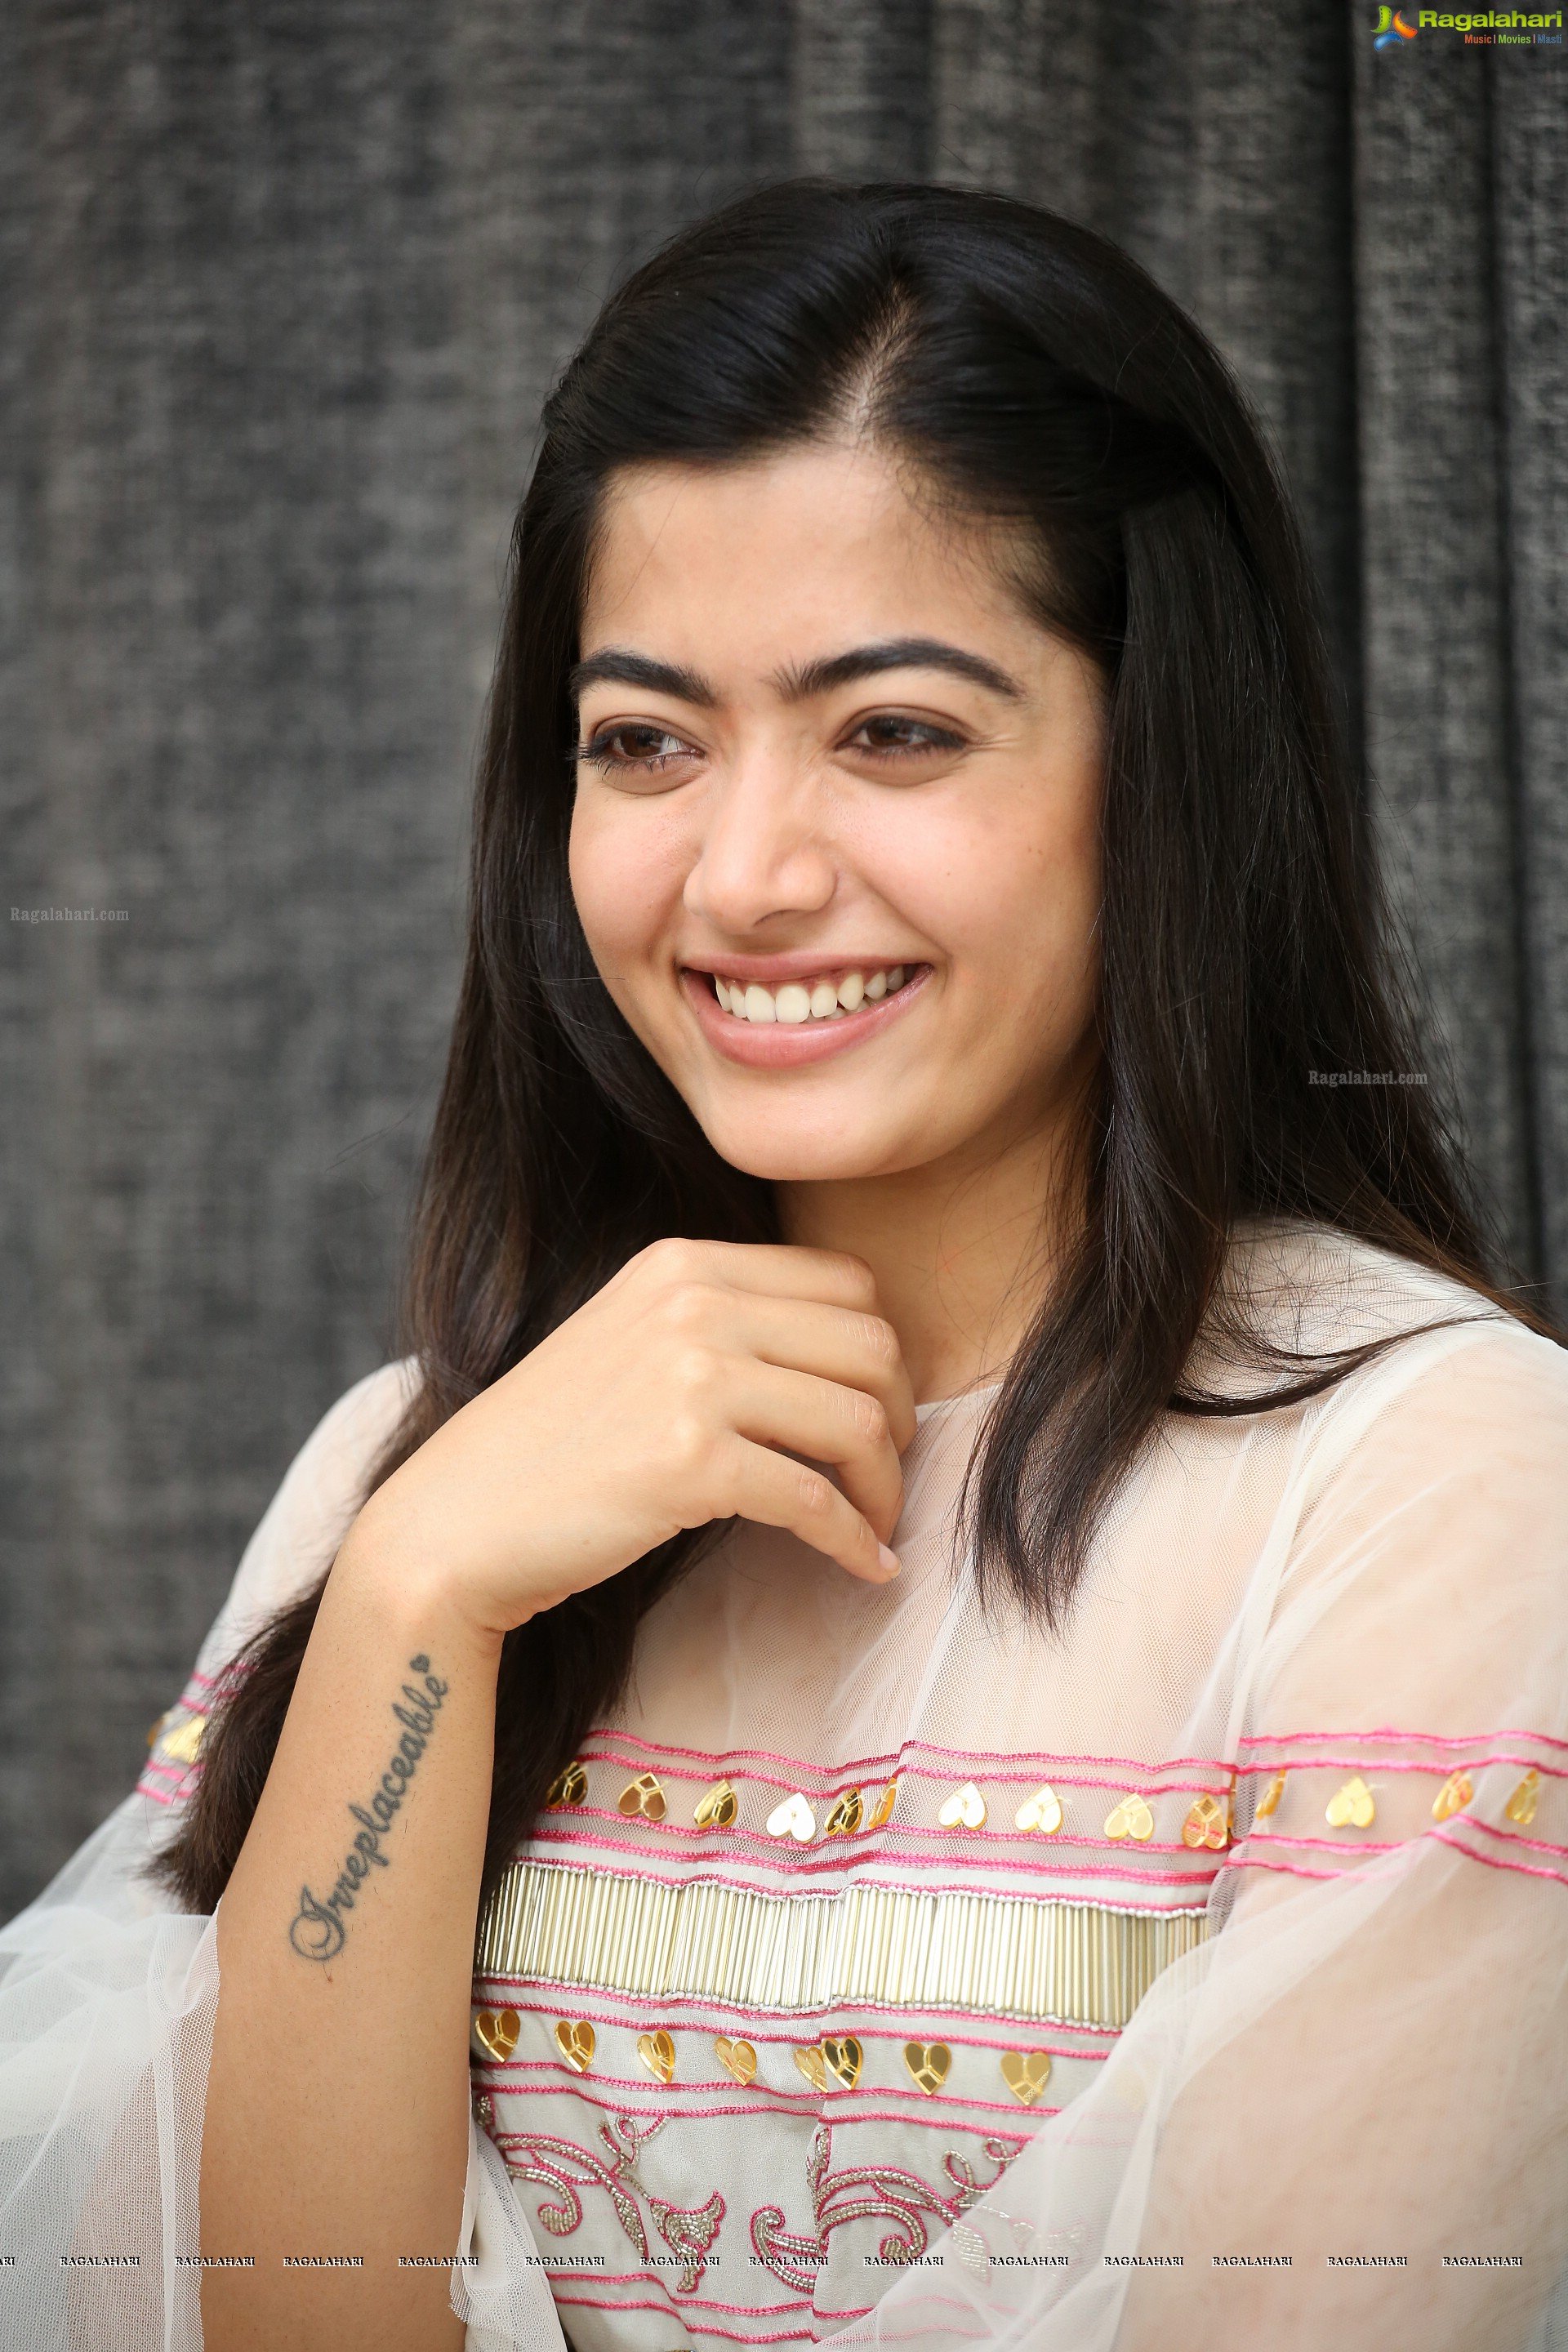 Rashmika the new queen in T-town?